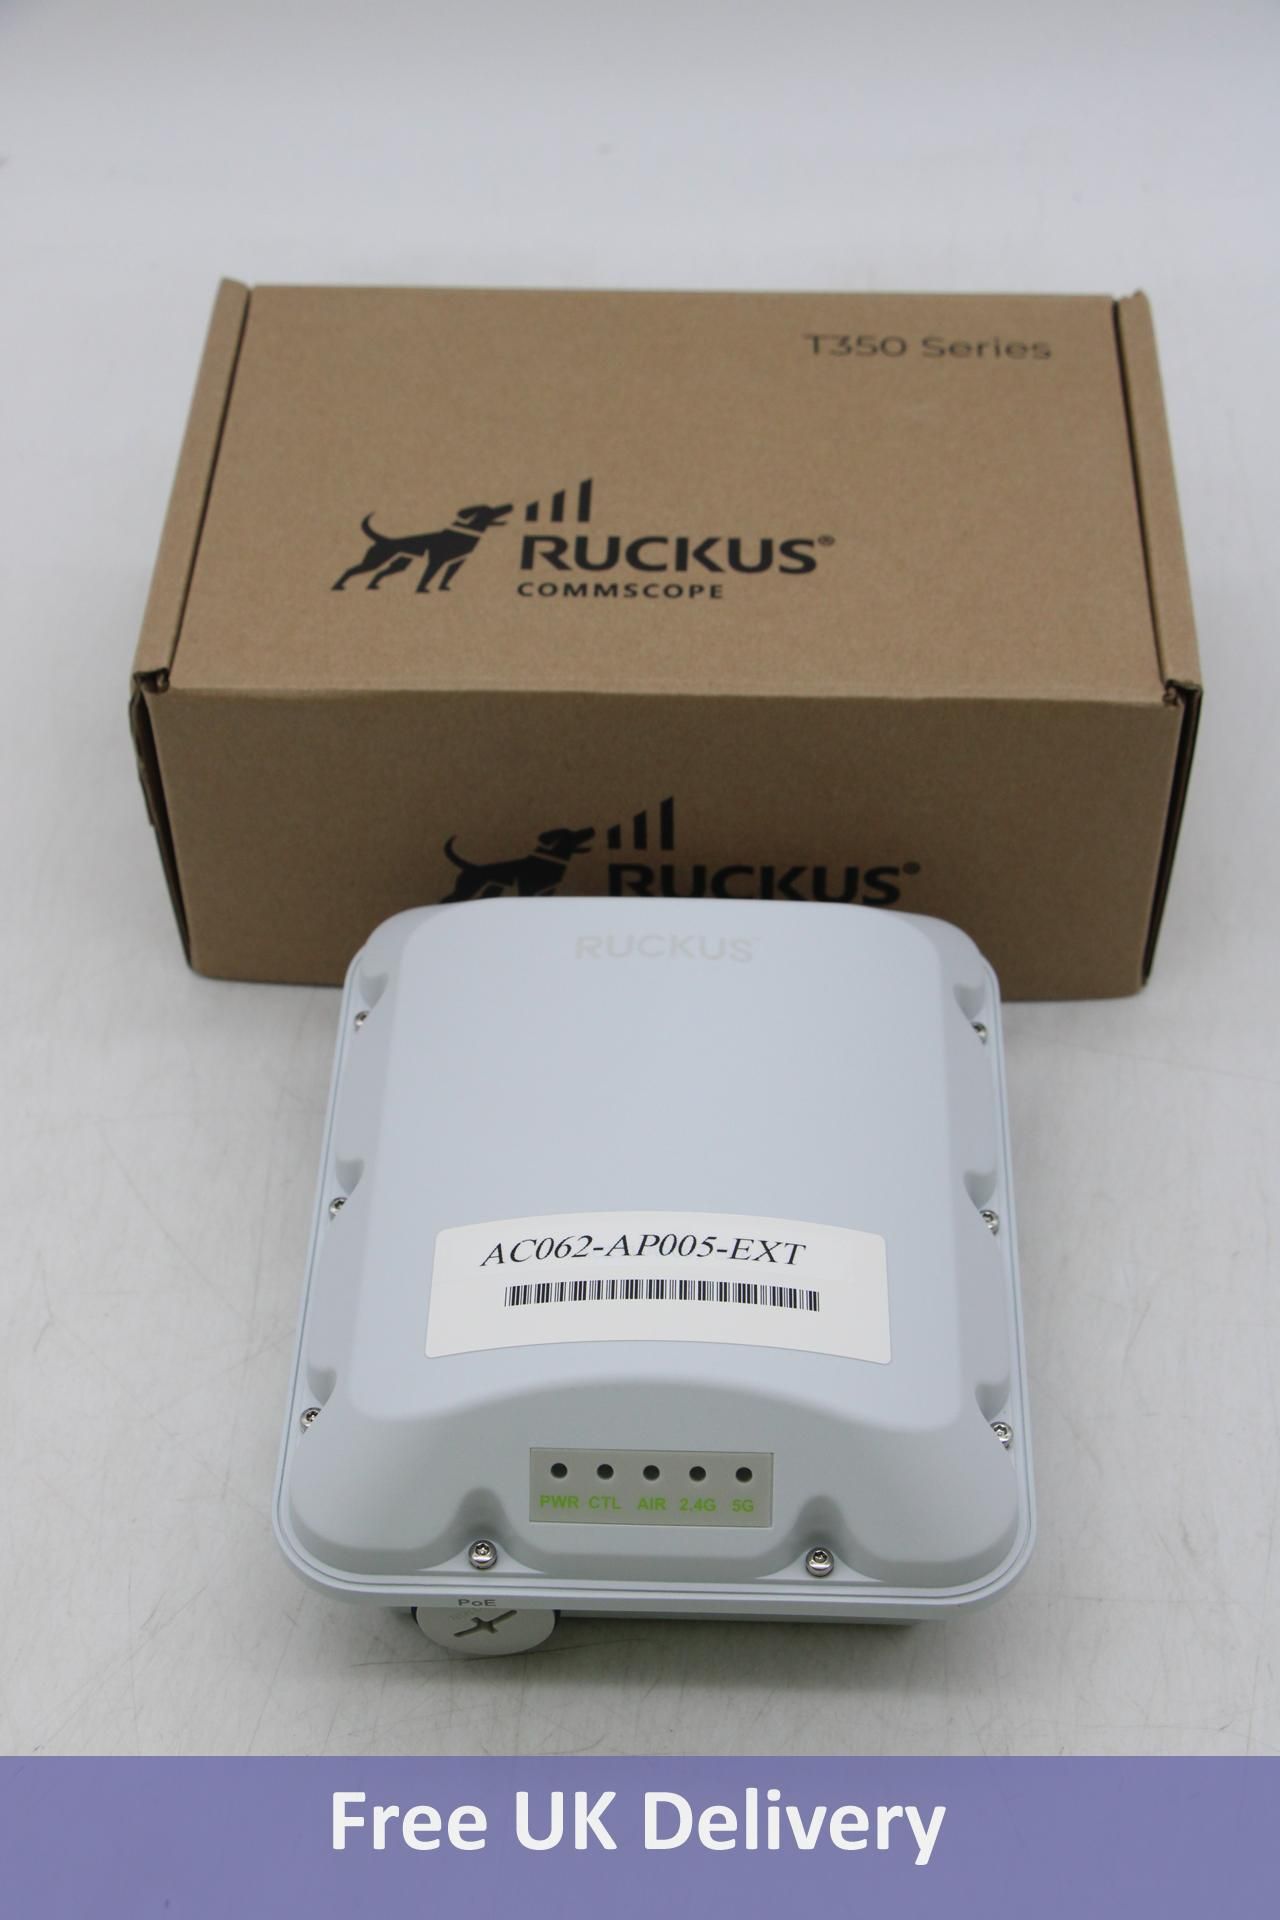 Ruckus Commscope T350 Series Wireless Wi Fi Outdoor Access Point